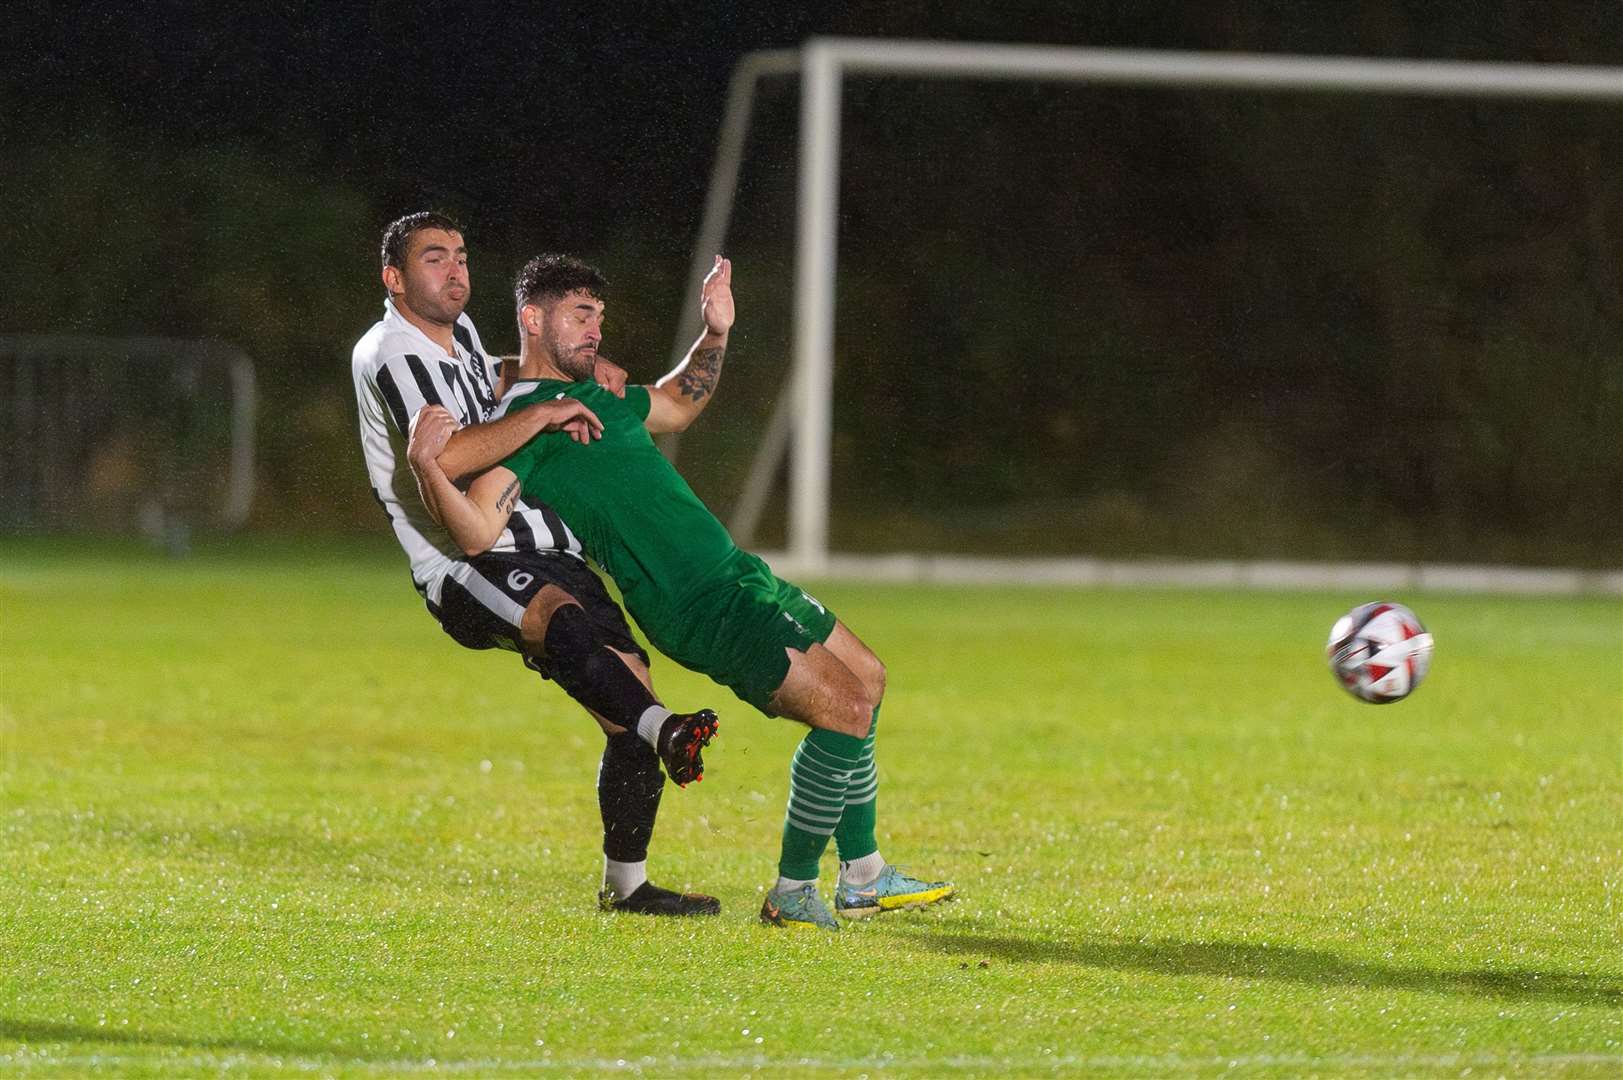 Action from Heacham's 4-0 victory over Dereham in the Thurlow Nunn Premier Division. Picture: Ian Burt